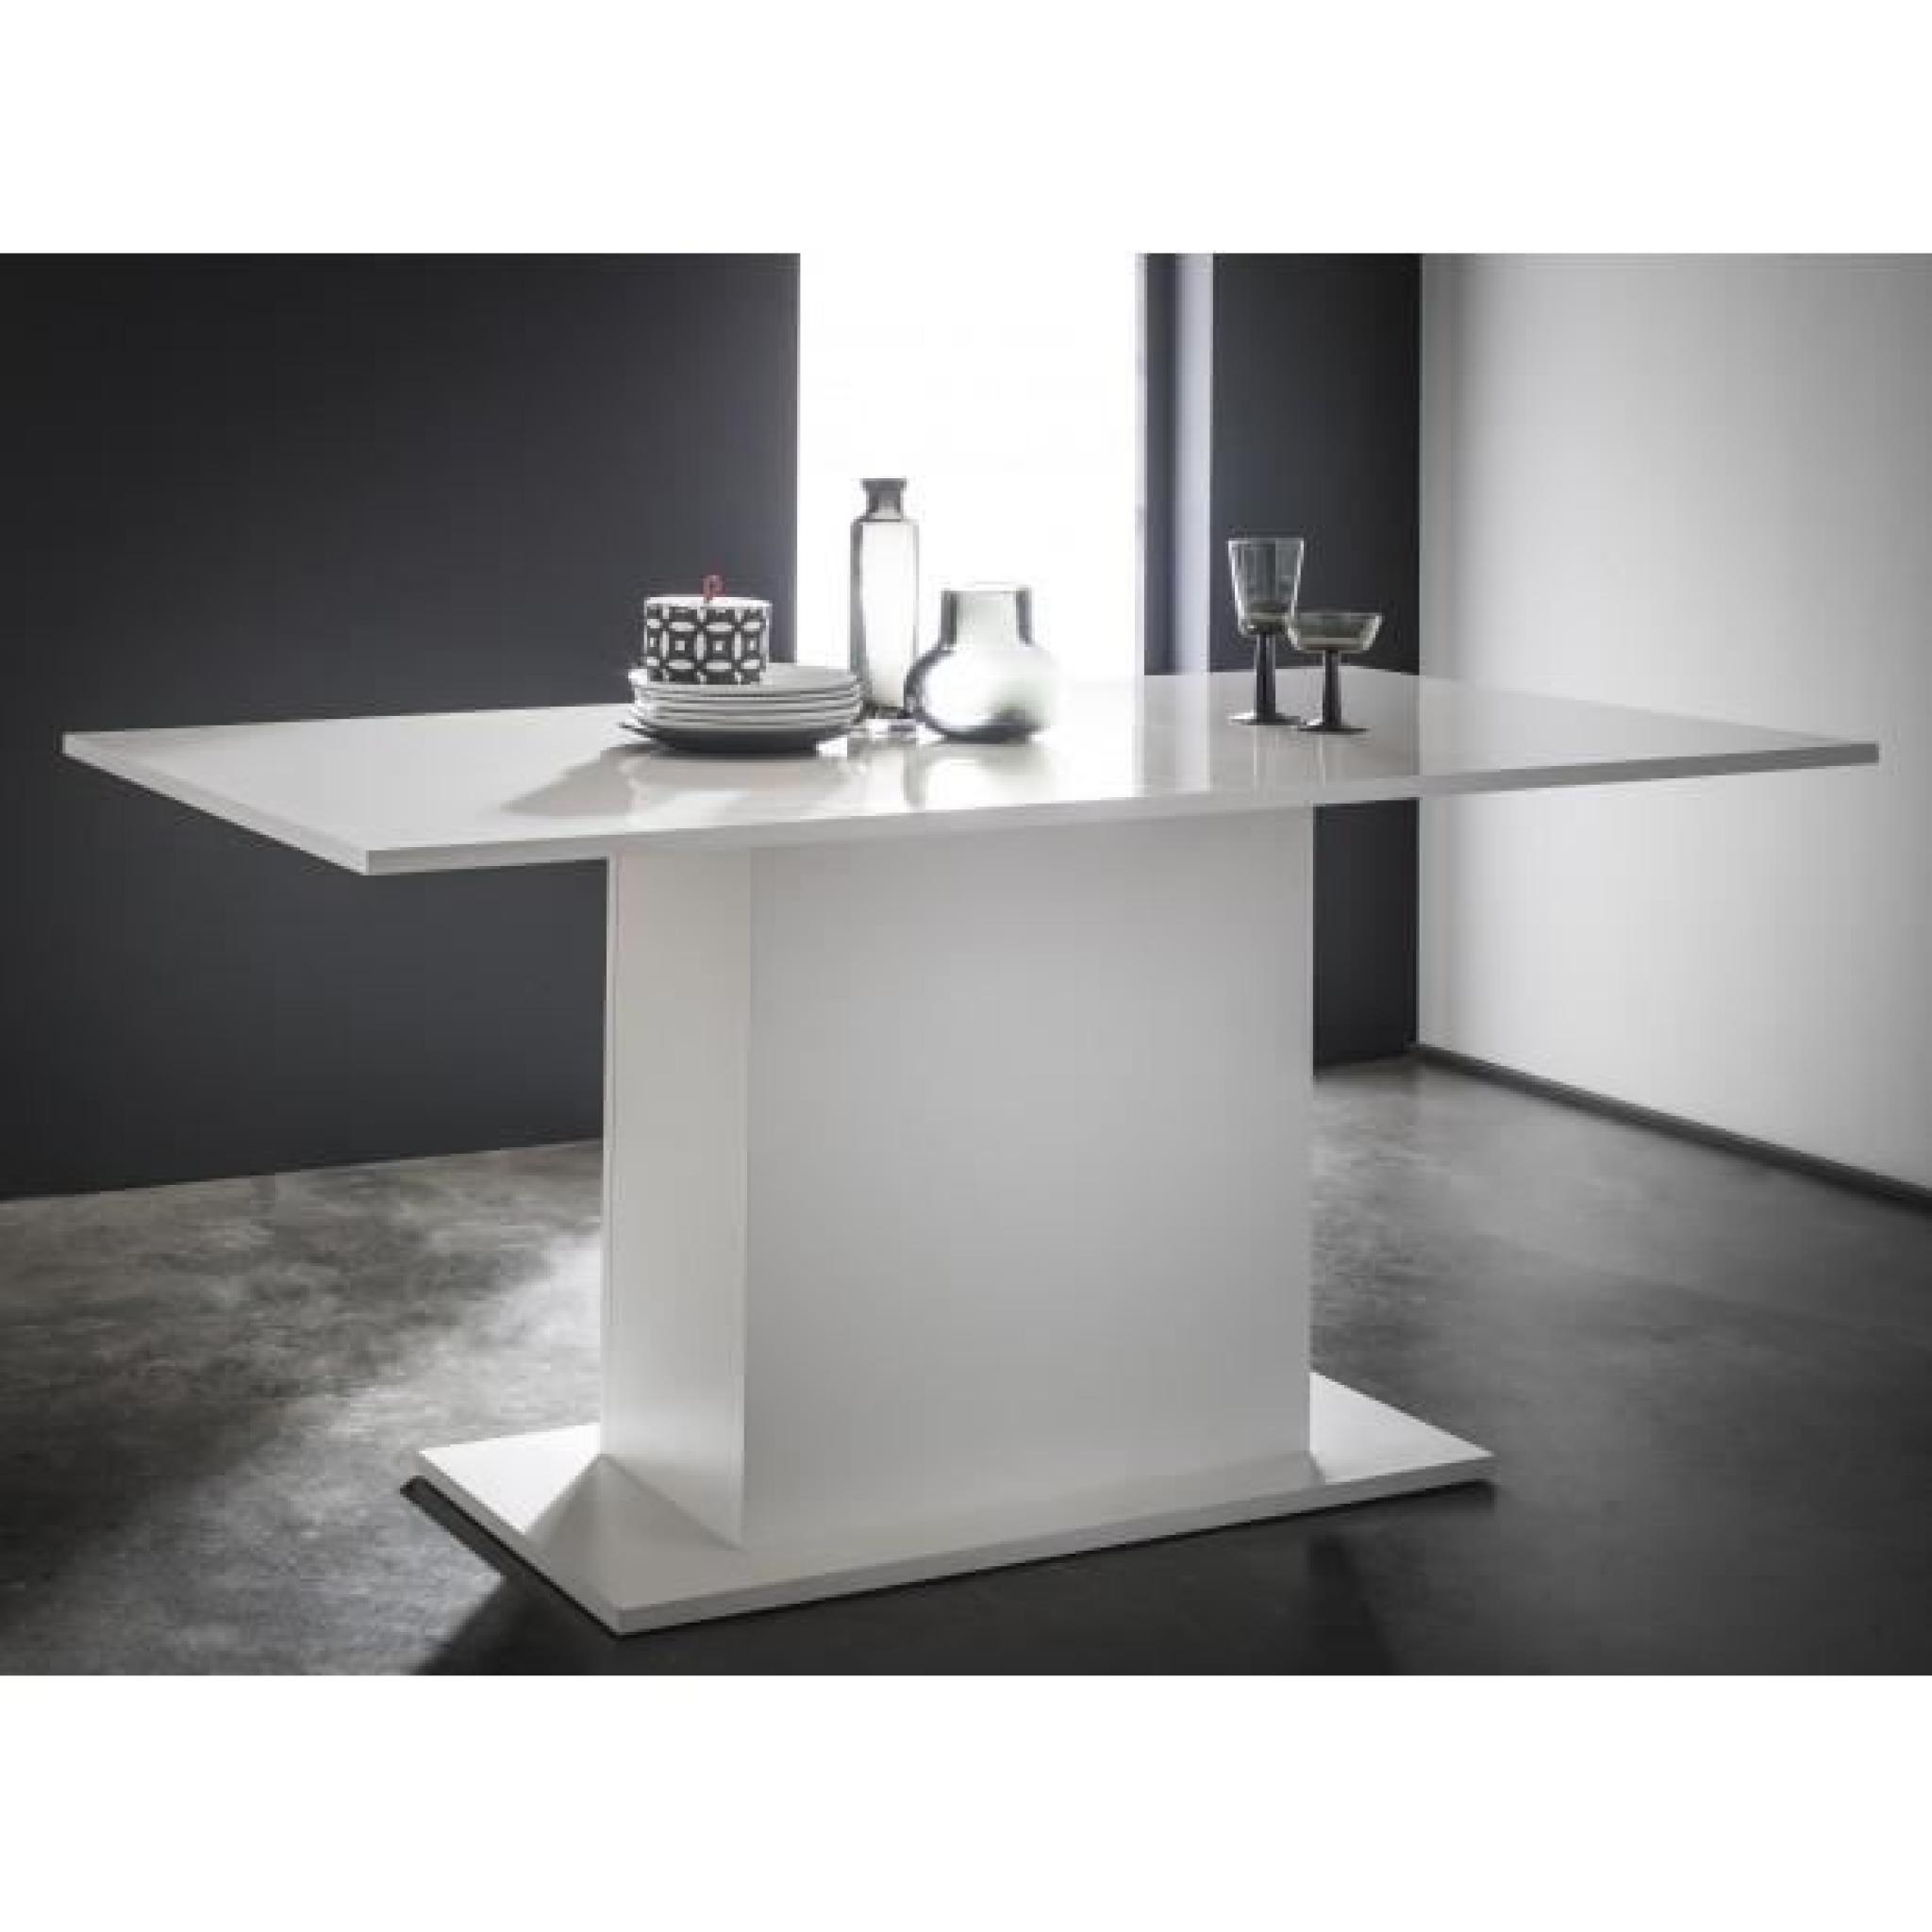 TABLE PIED CENTRAL ICY PERLE/BLANC BRILLANT